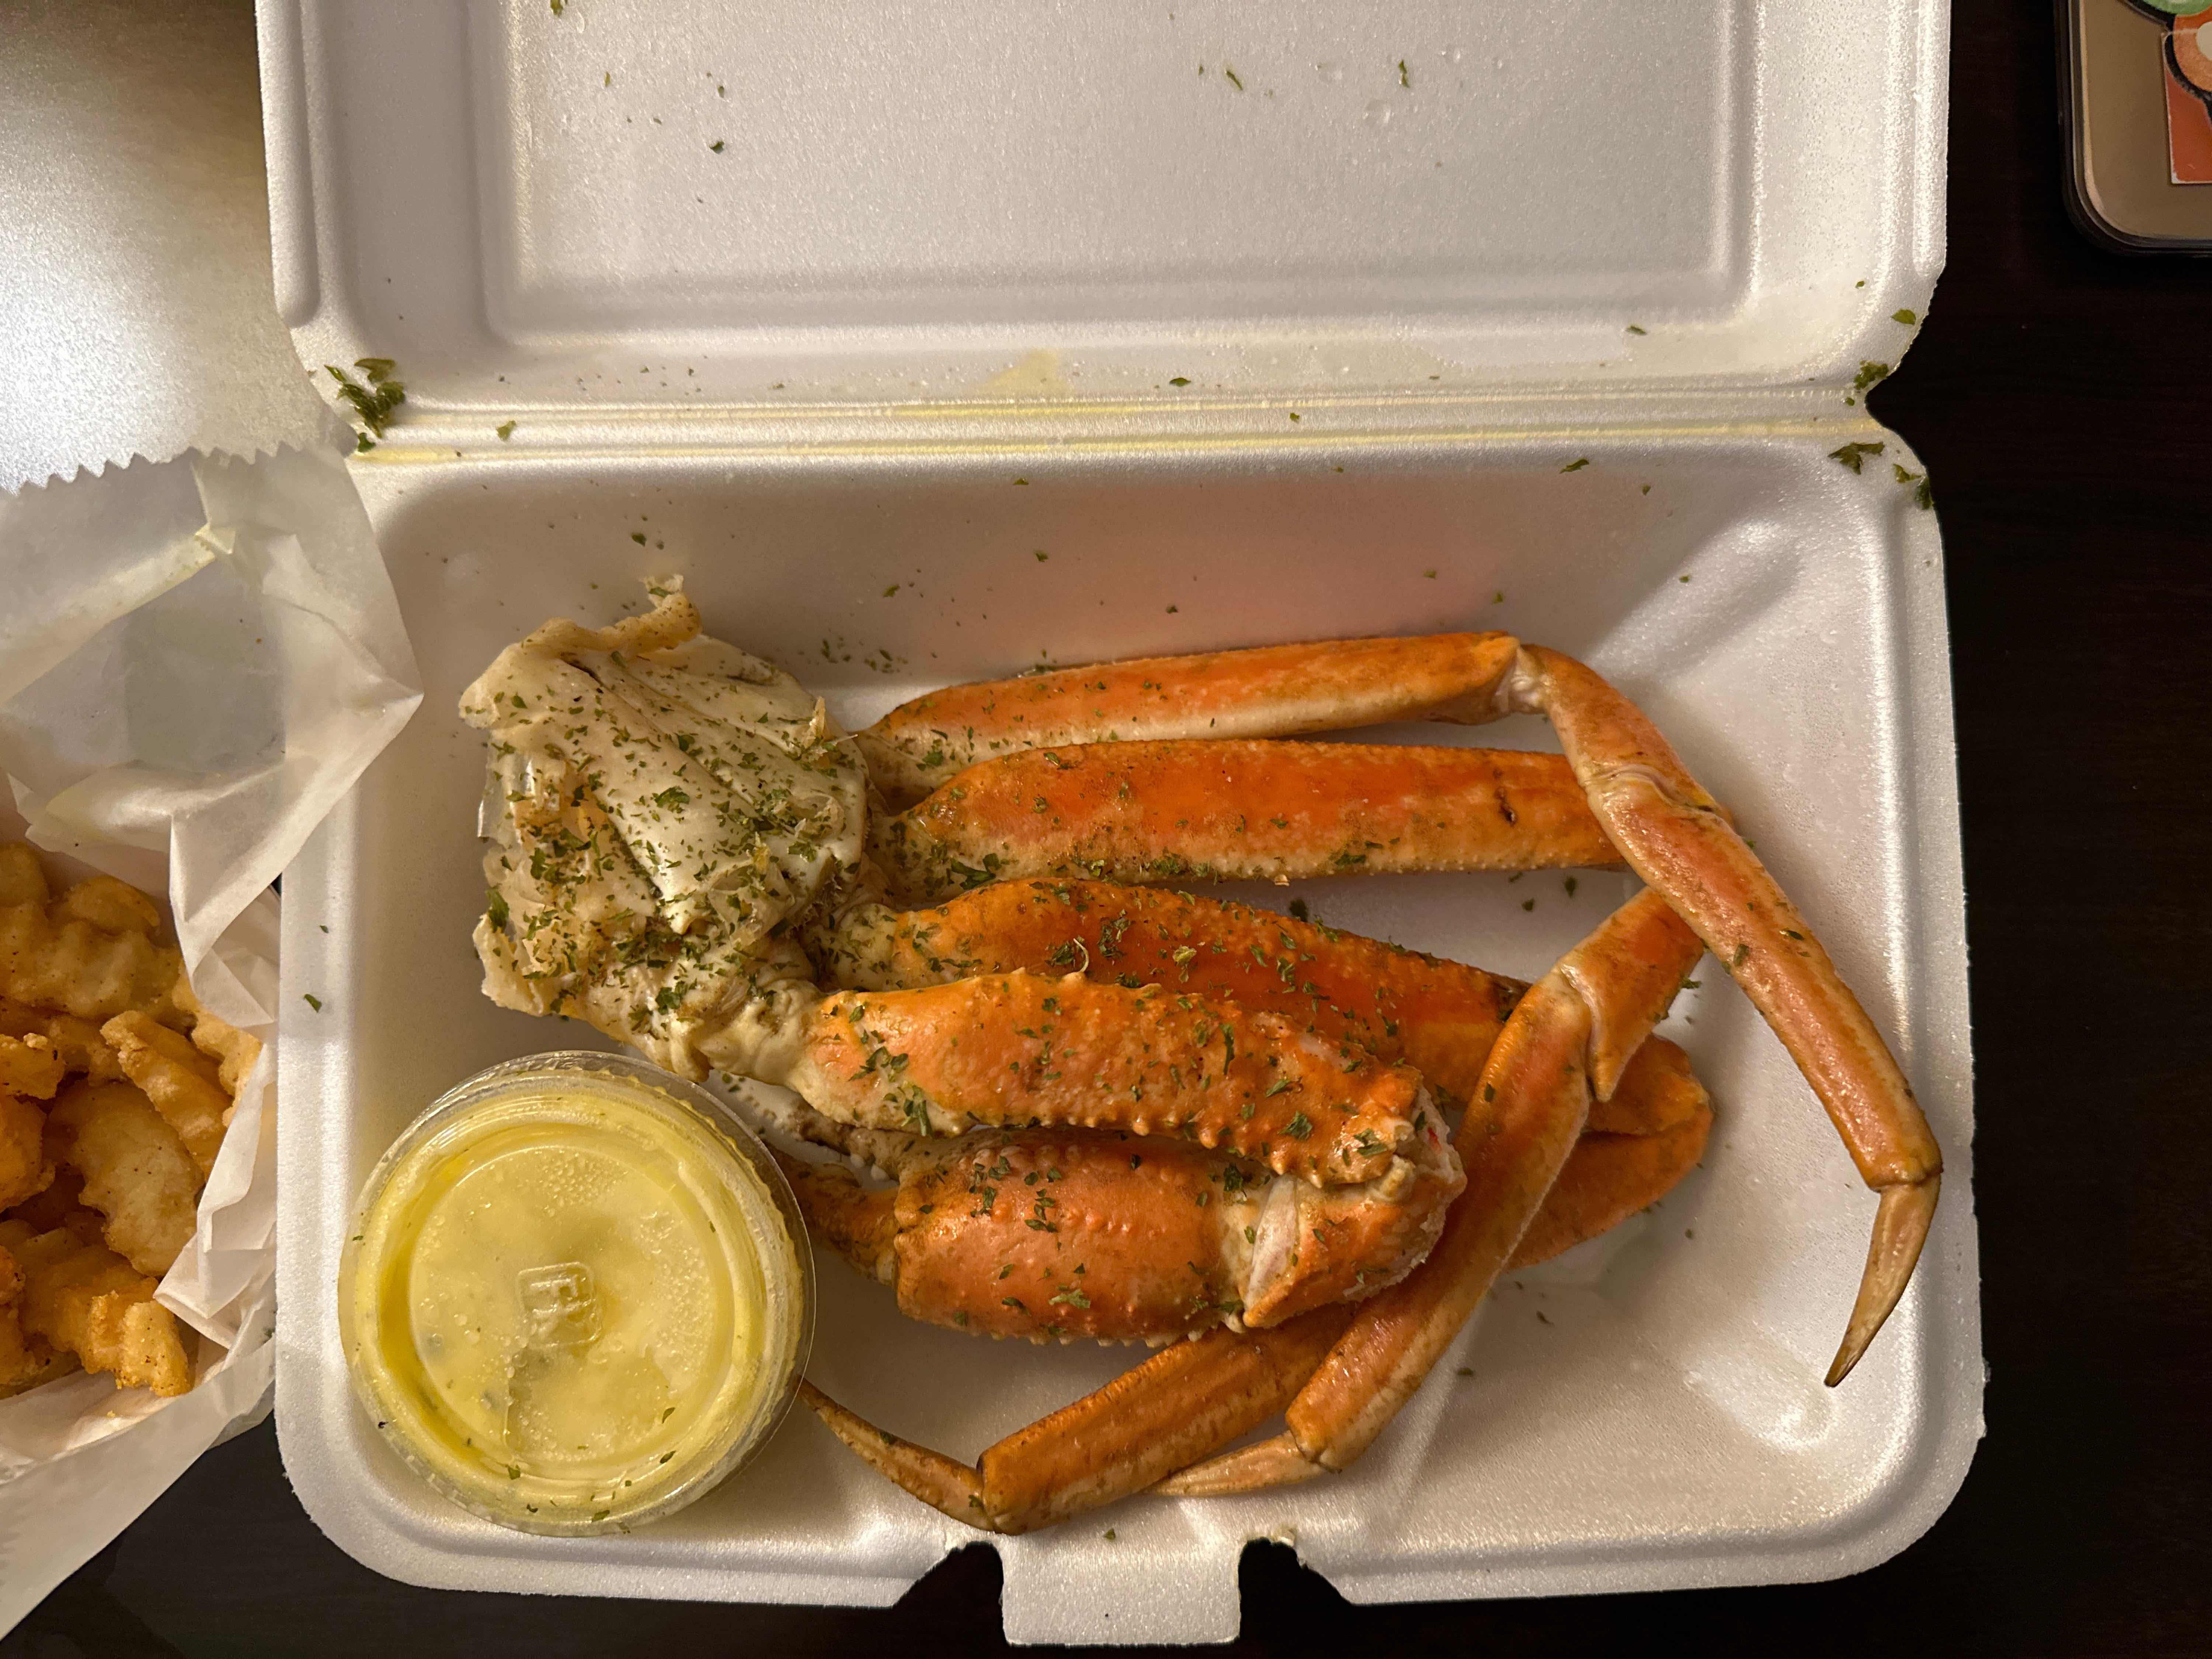 OFF THE HOOK FISH AND SEAFOOD, Swainsboro - Menu, Prices